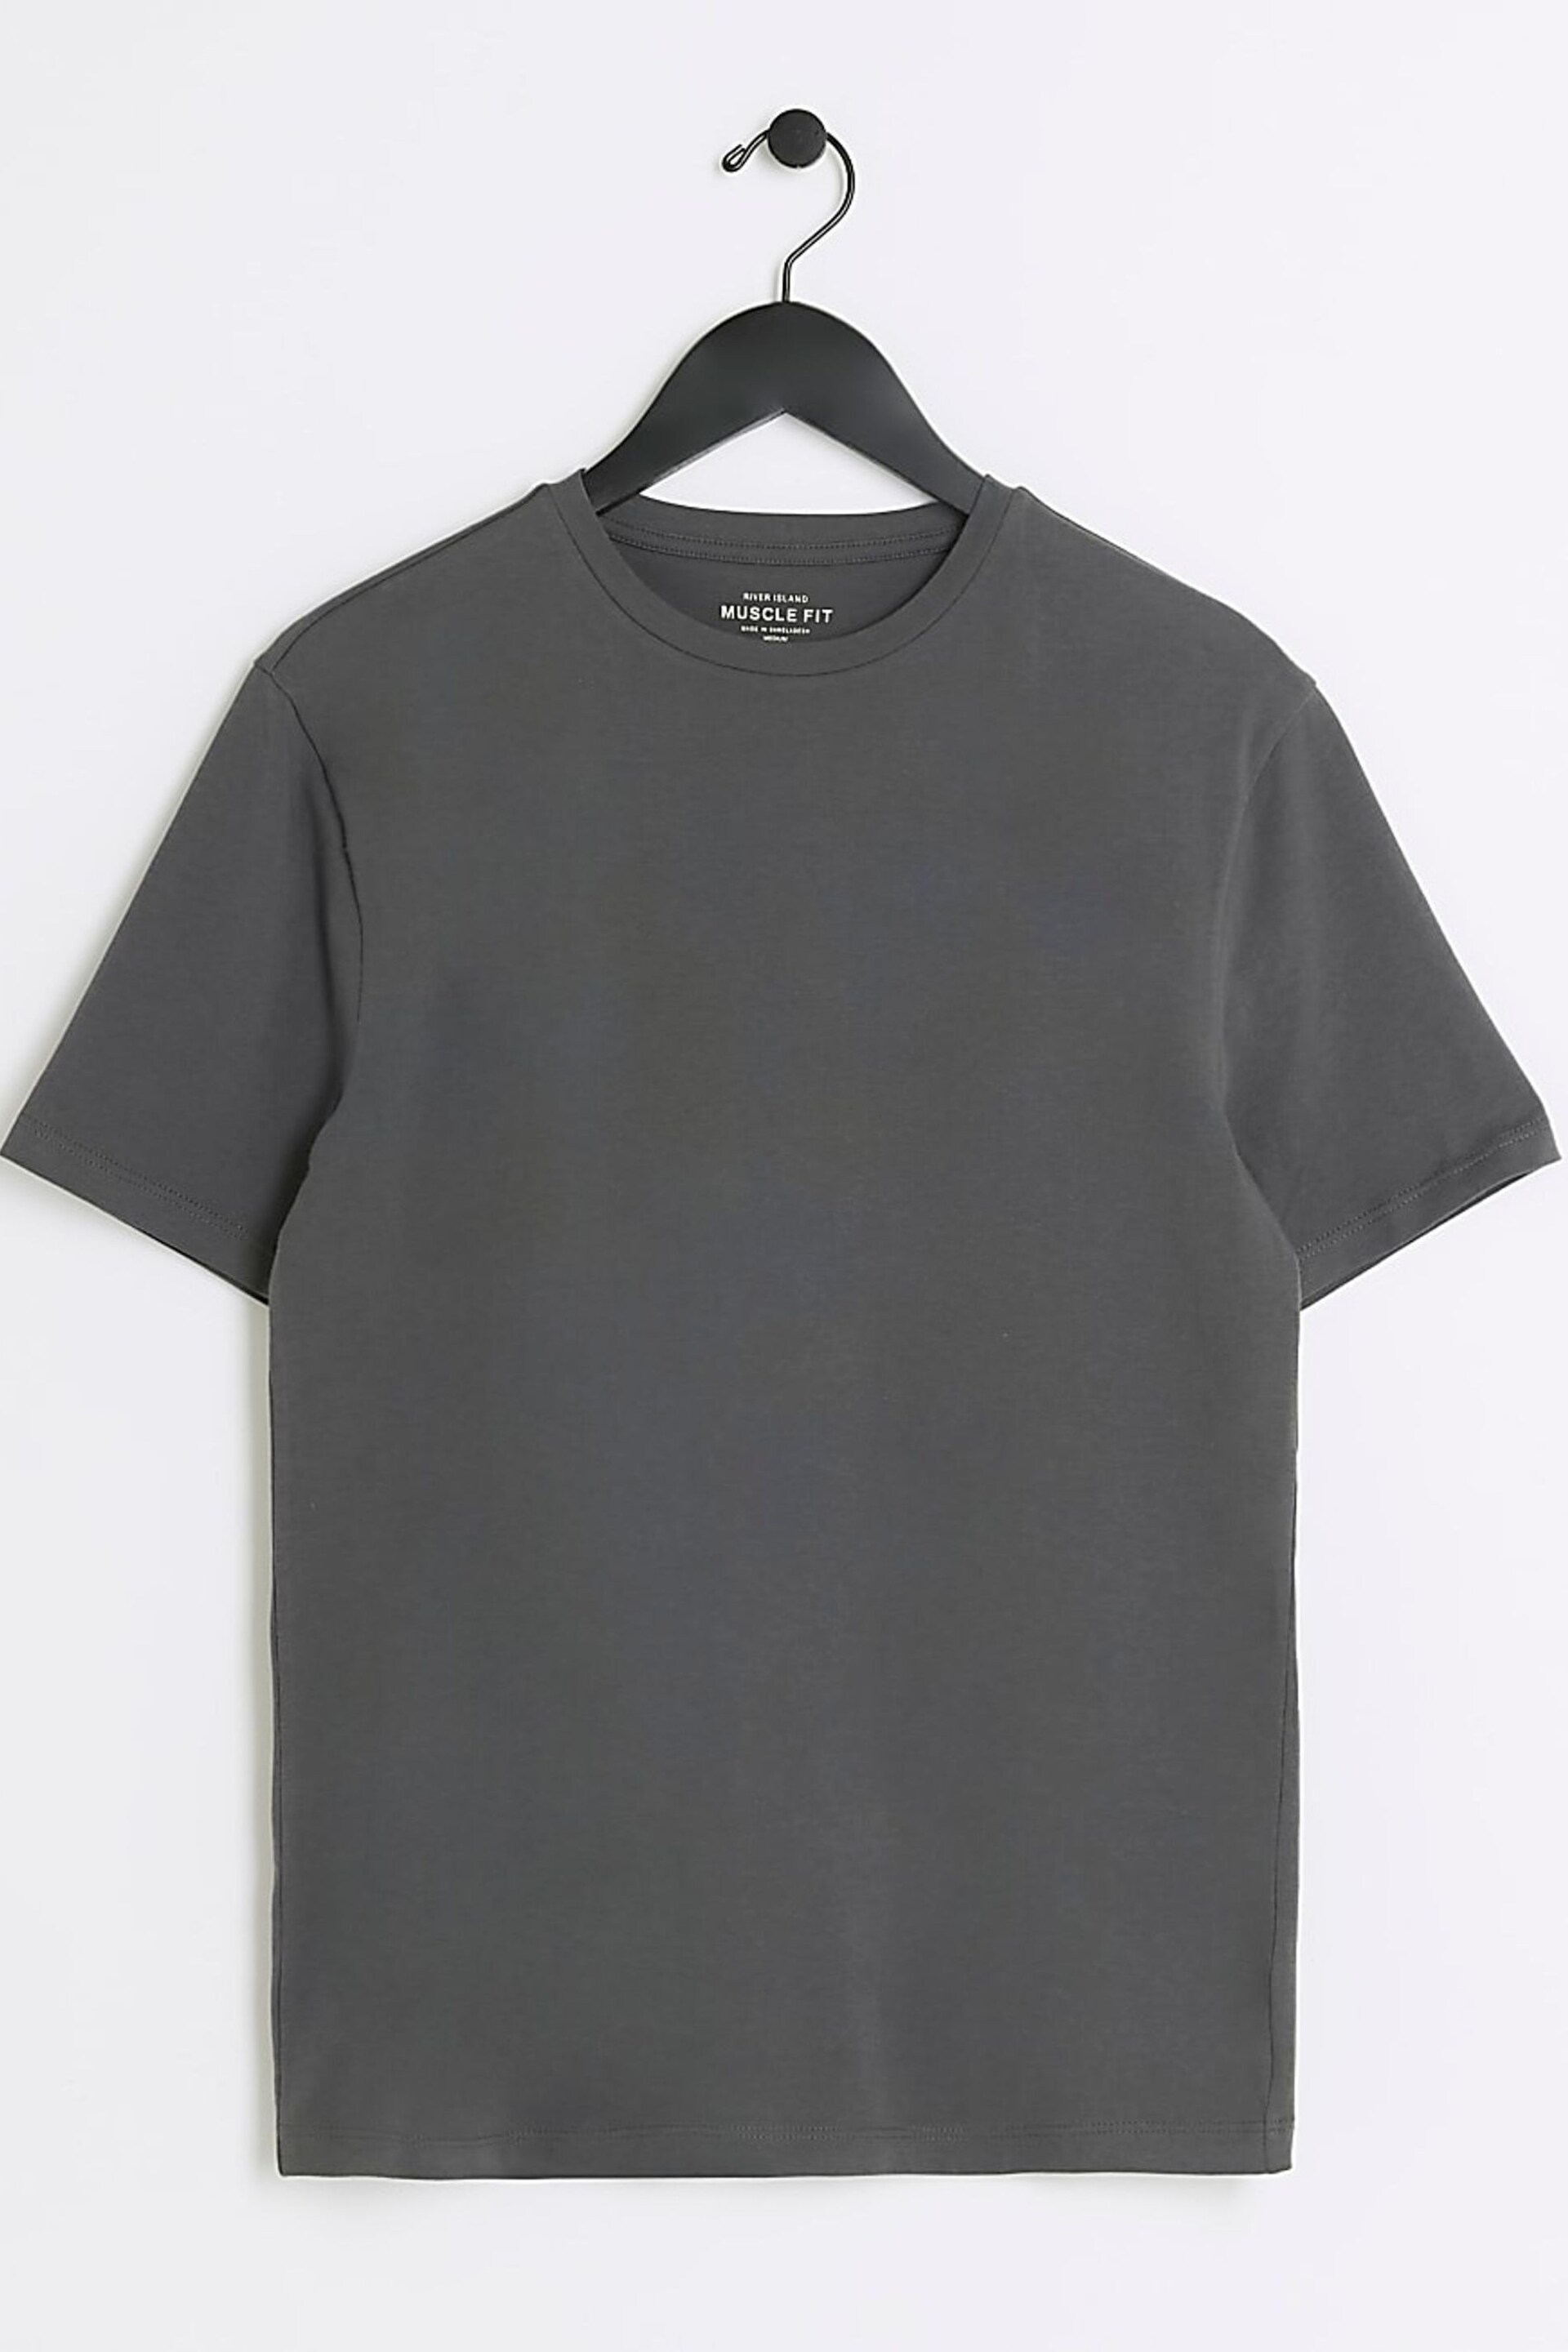 River Island Grey Muscle Fit T-Shirt - Image 5 of 6